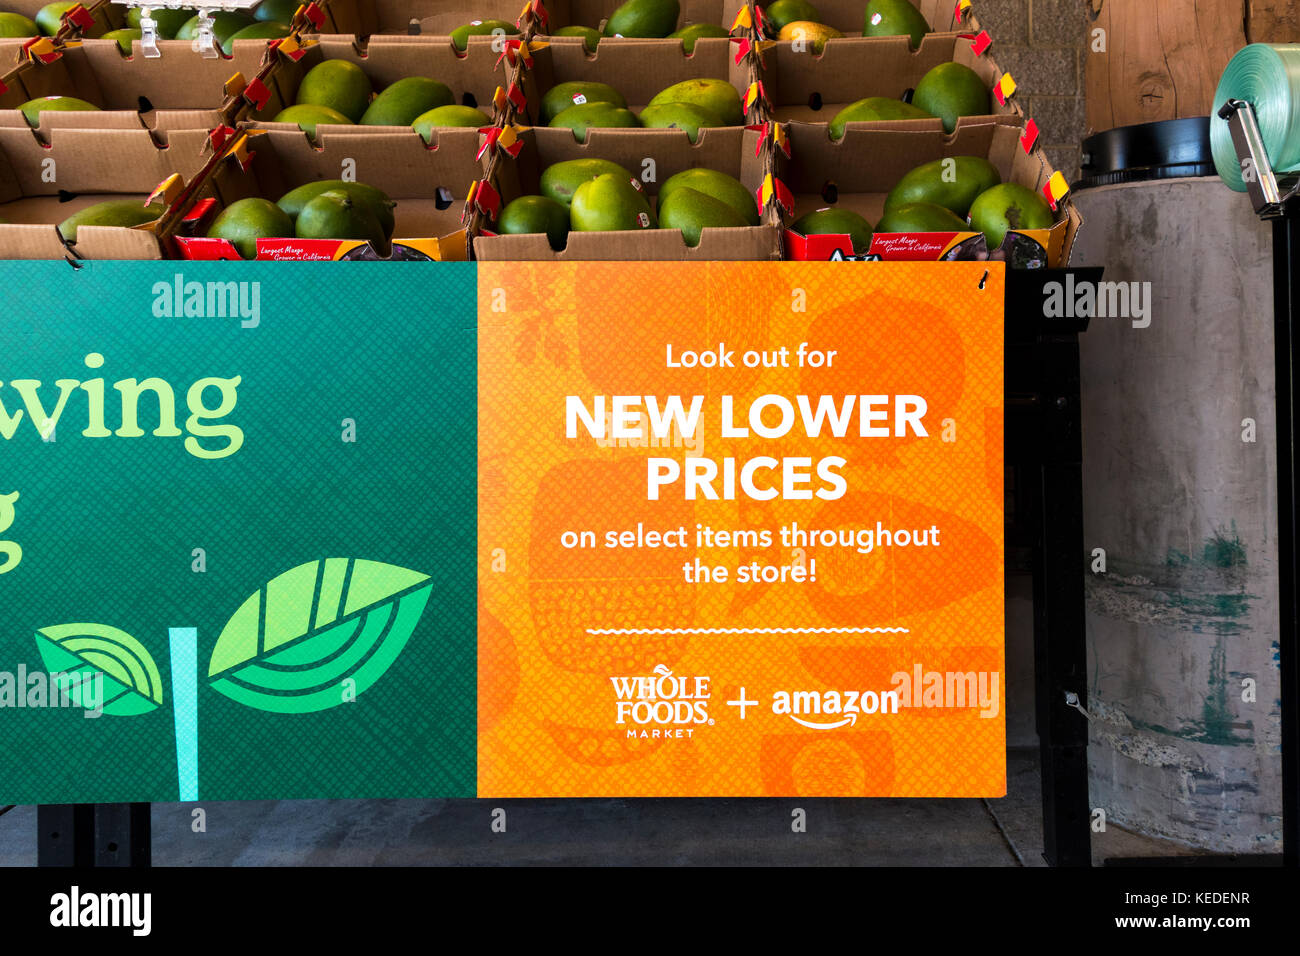 Amazon and Whole Foods sign on Cupertino Whole Foods store Stock Photo